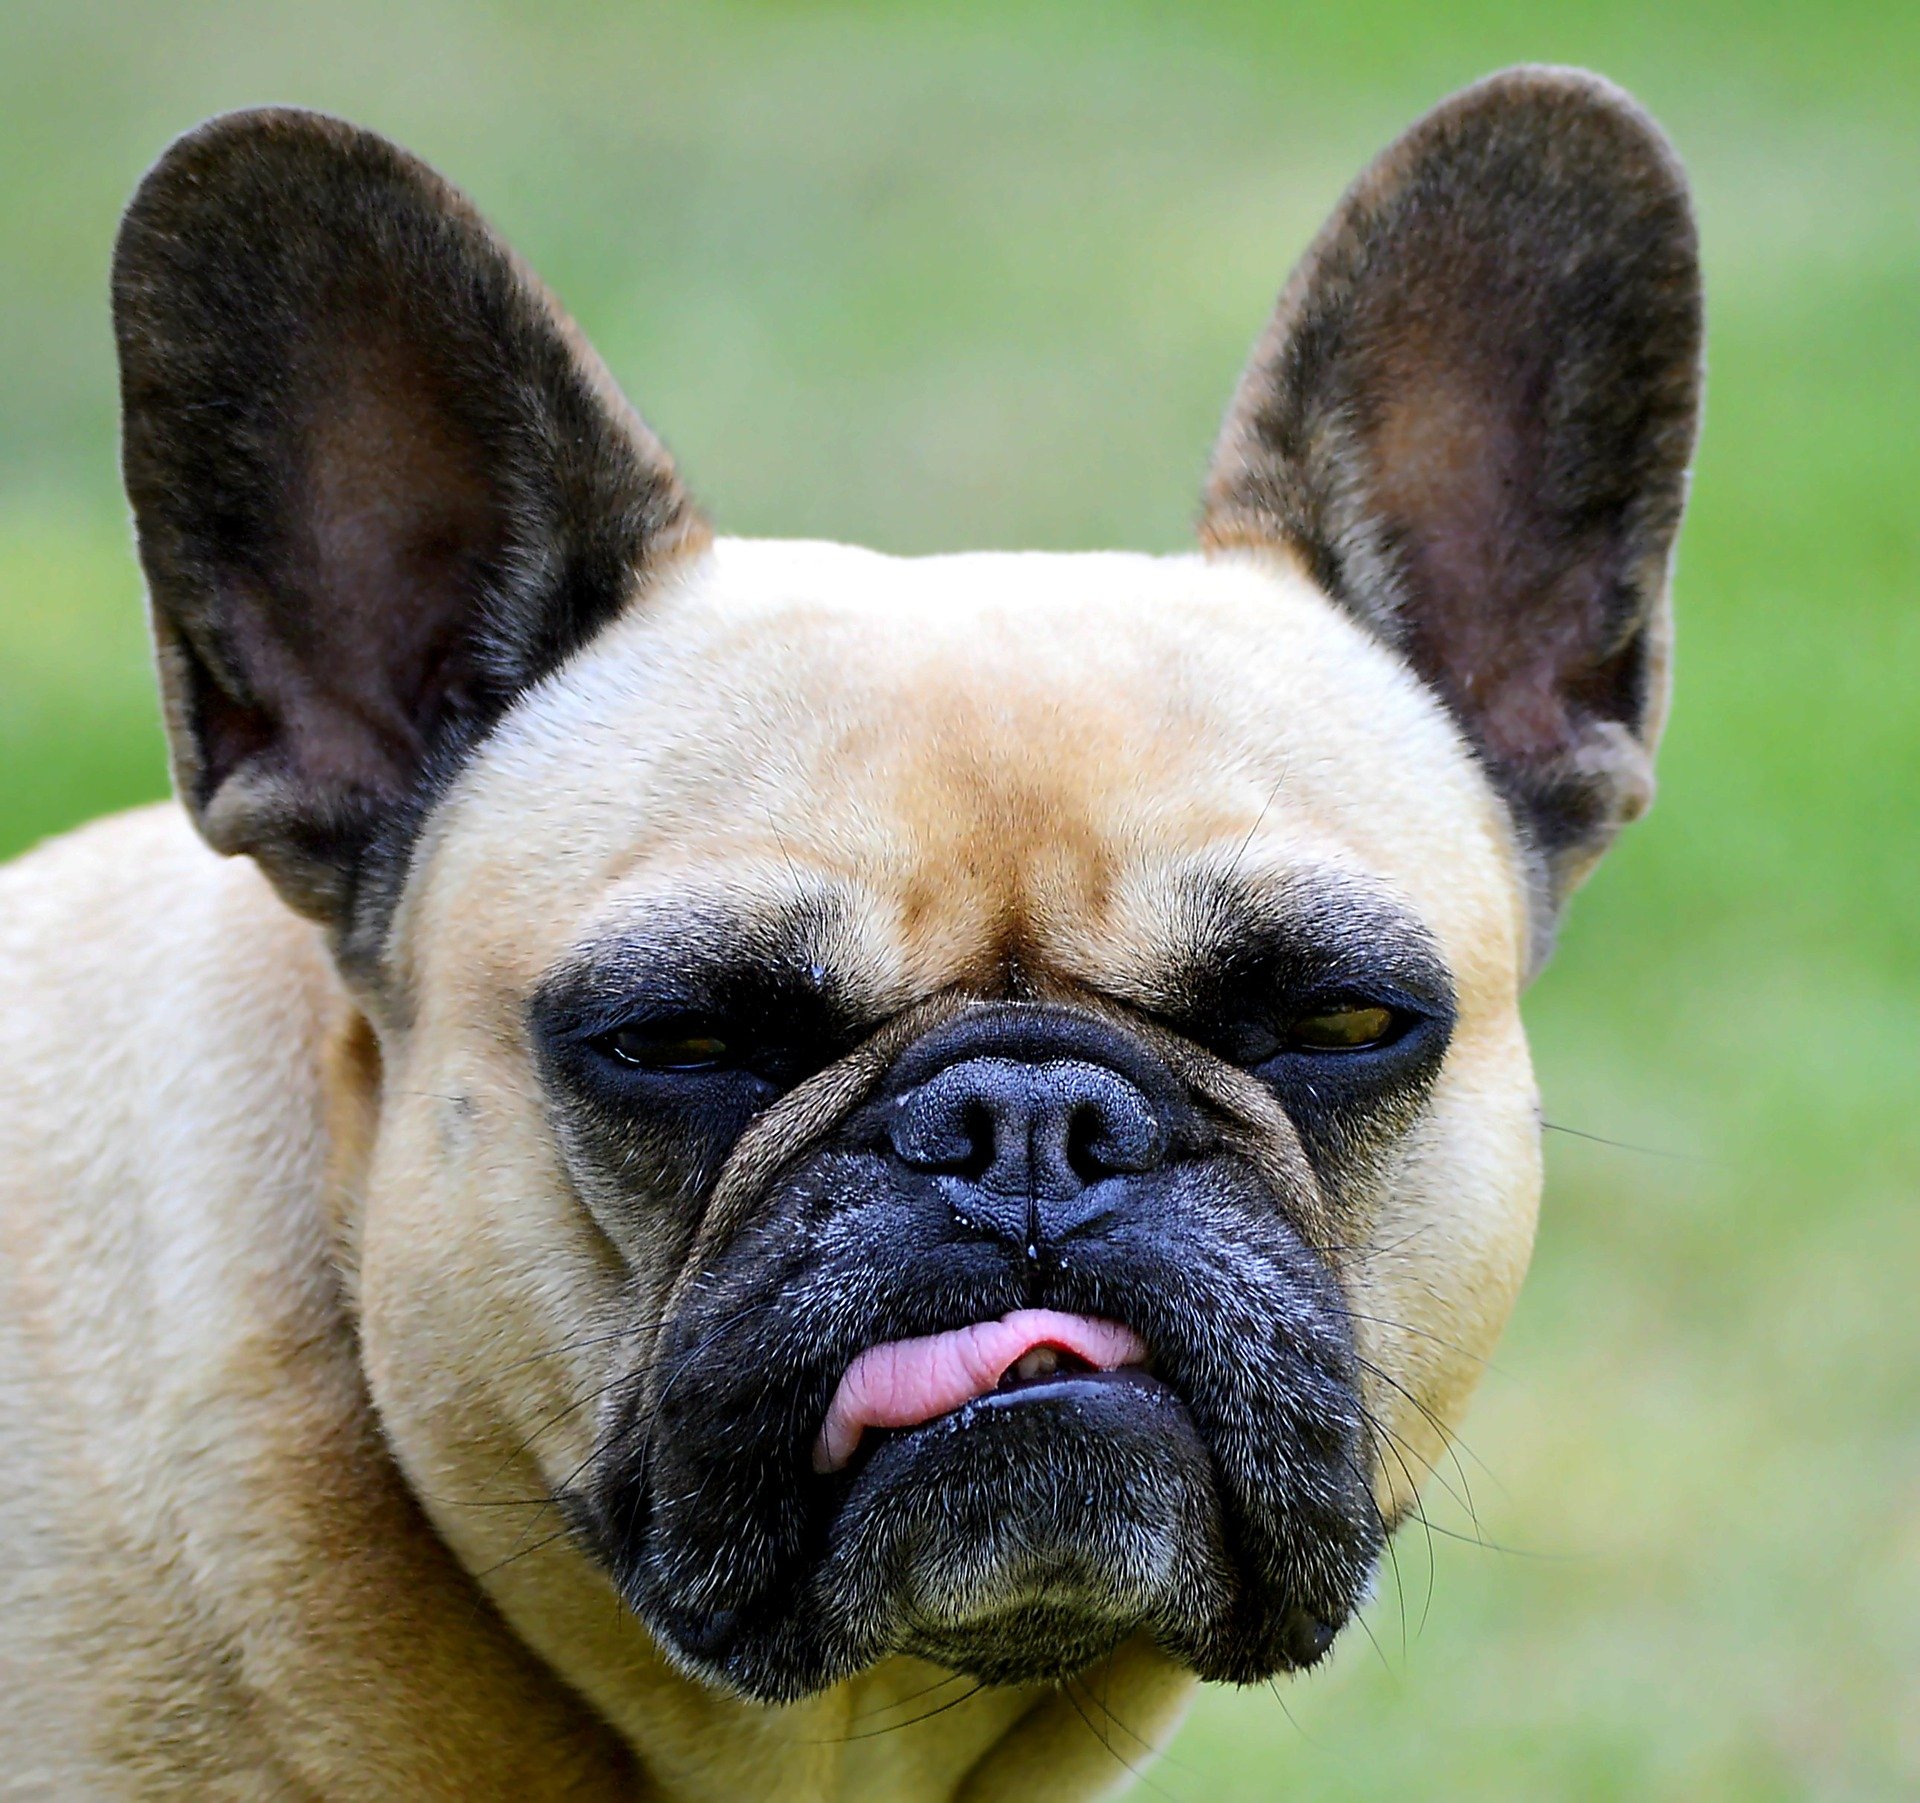 French Bulldog pros and cons. Is the Frenchie right for me?